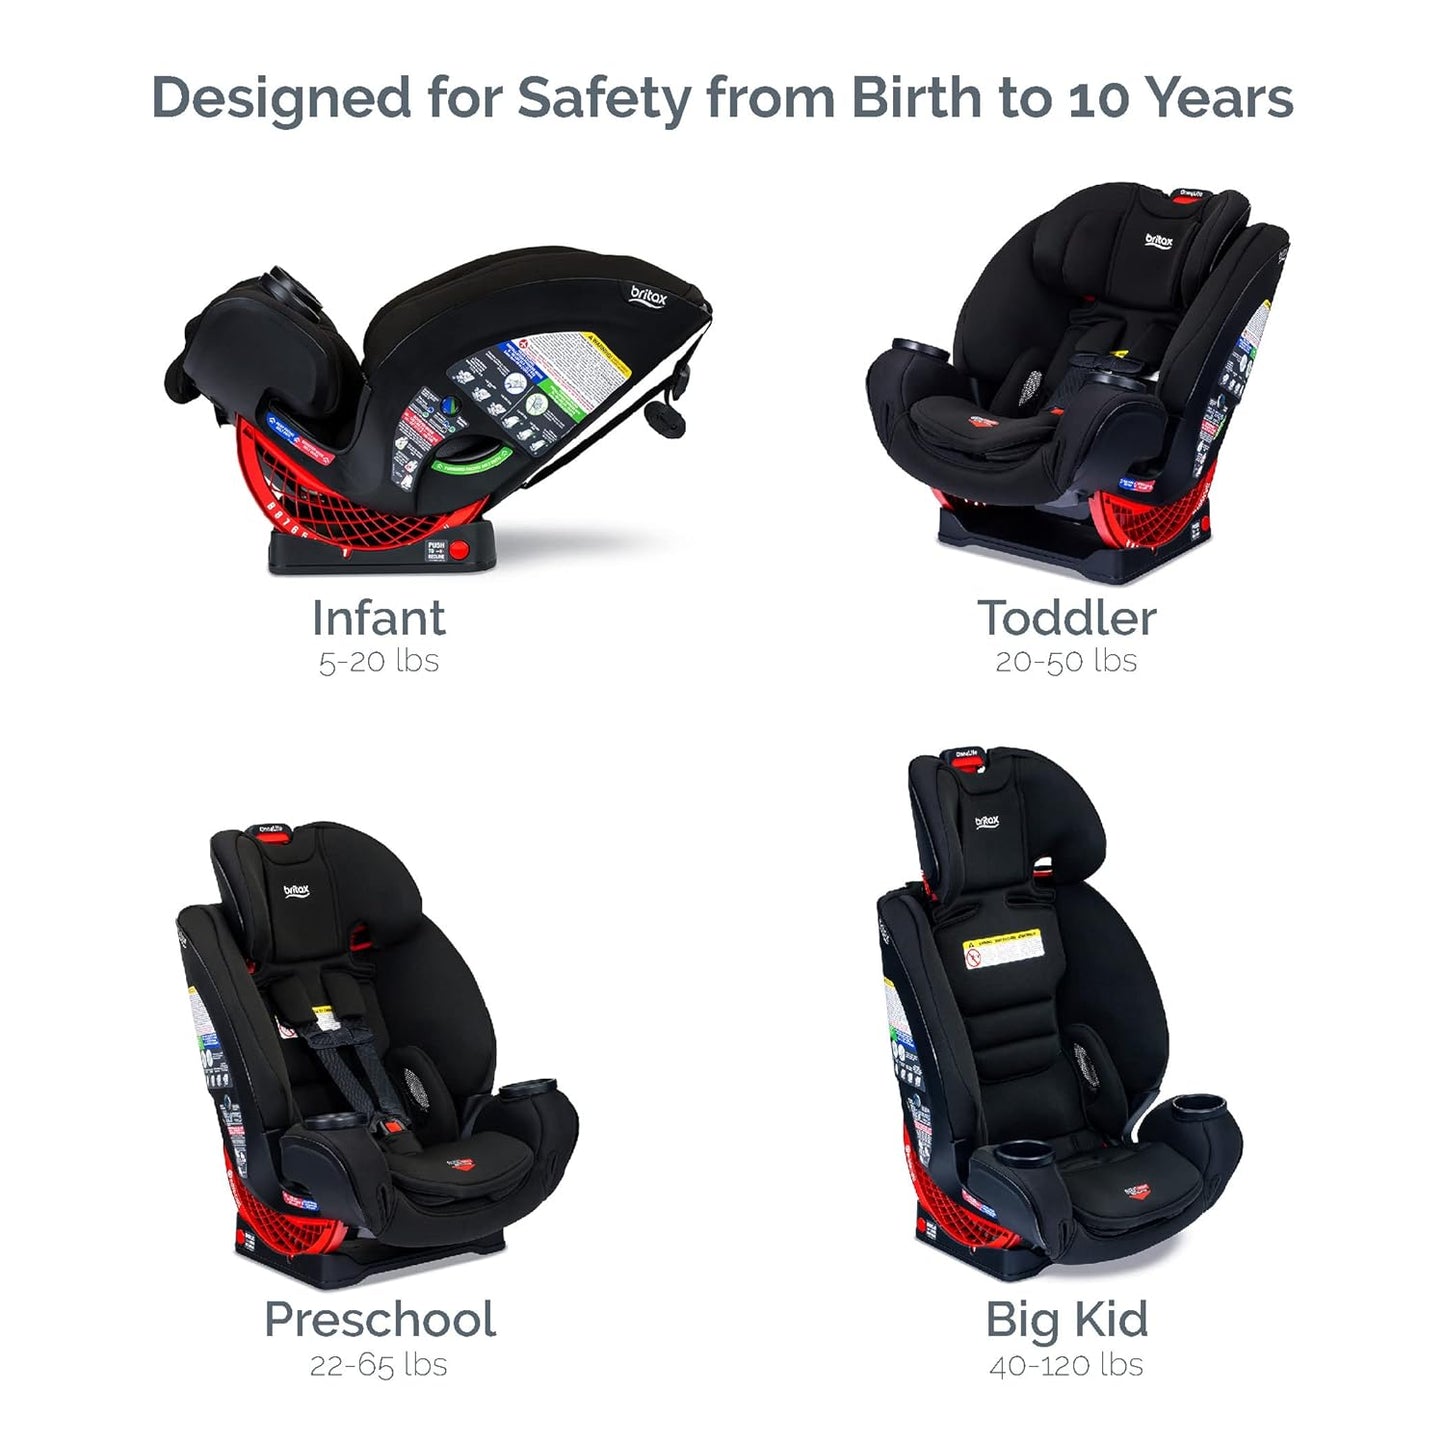 One4Life All-in-One Car Seat Rental